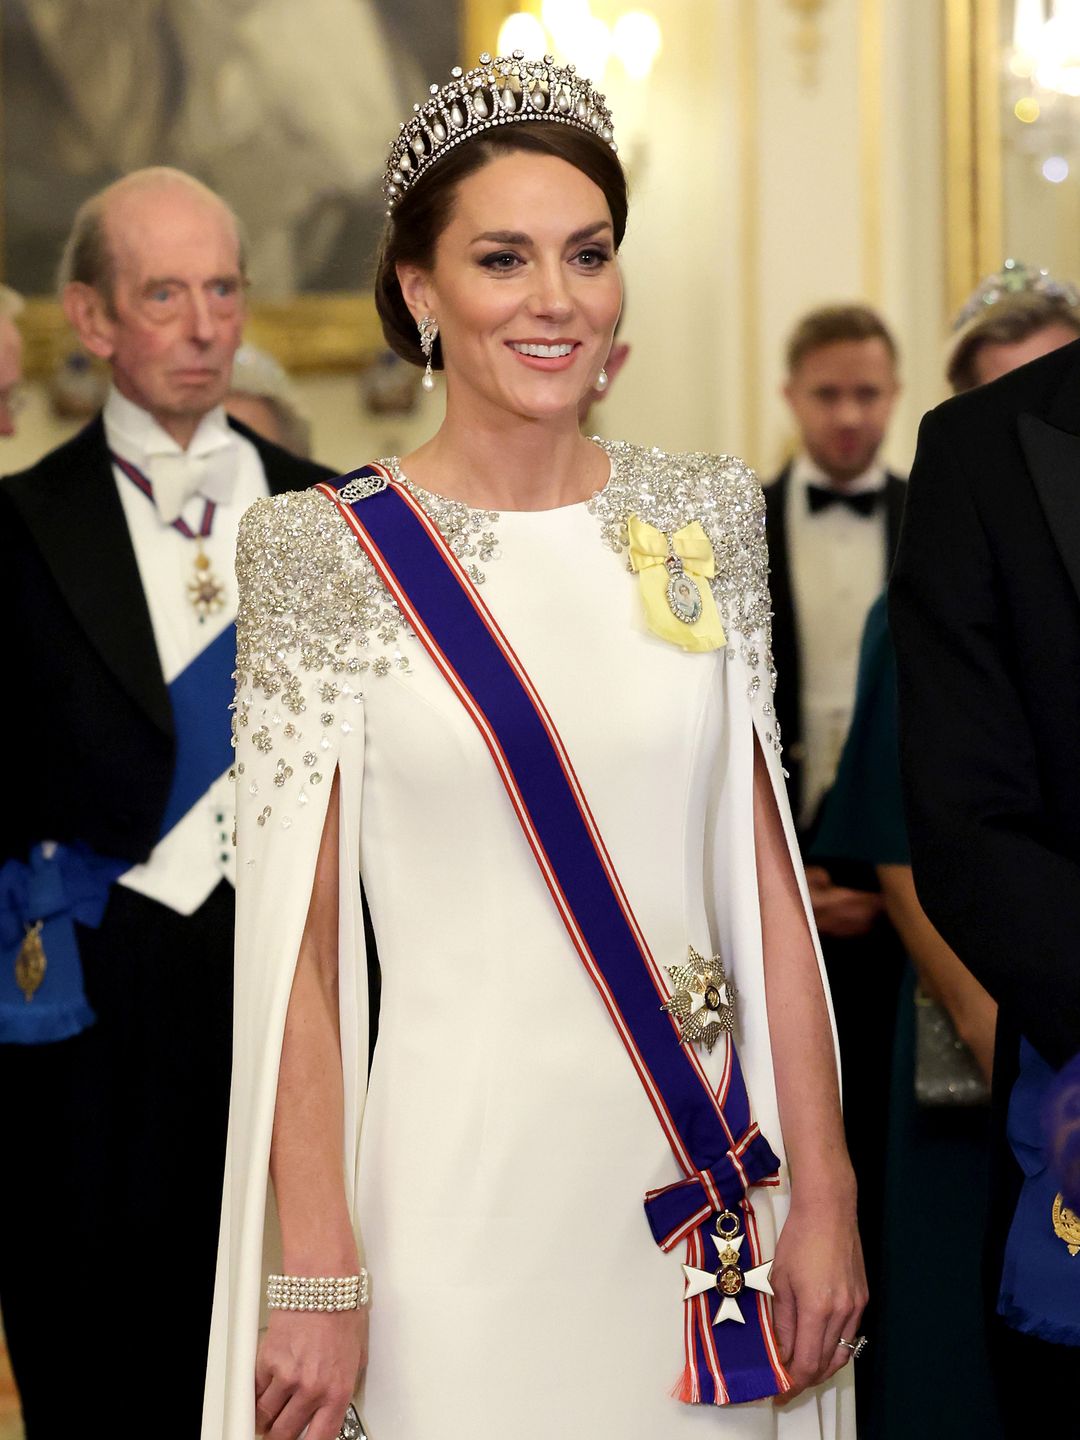 The Princess of Wales at a state banquet in 2022